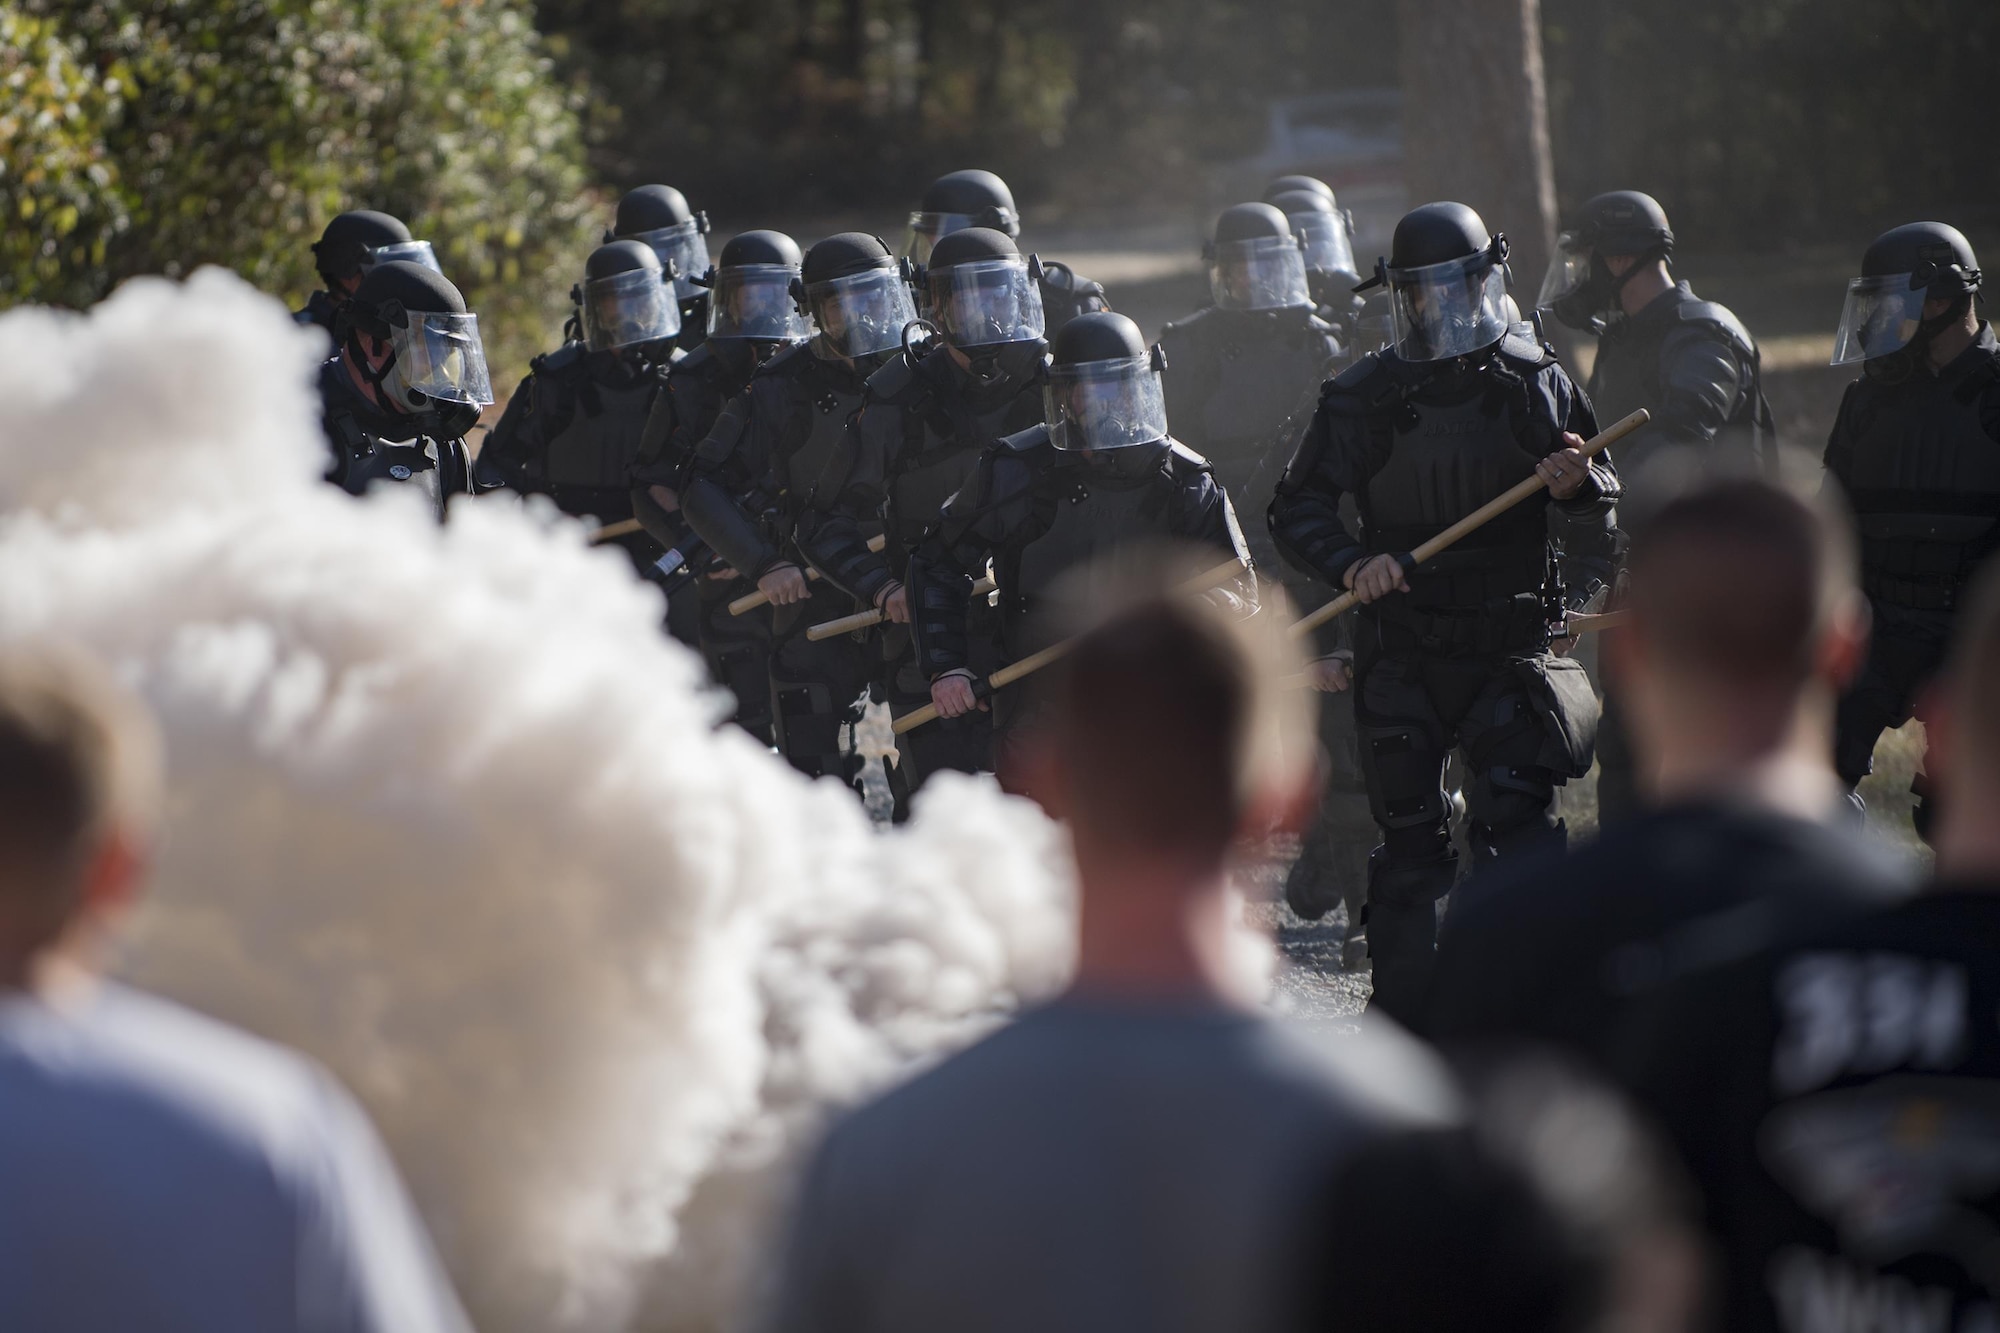 Members of Georgia State Patrol’s Mobile Field Force march toward a group of simulated rioters while a smoke grenade burns, Nov. 16, 2016, at Moody Air Force Base, Ga. Between the two days of training, approximately 45 GSP officers participated in the training. (U.S. Air Force photo by Airman 1st Class Daniel Snider)